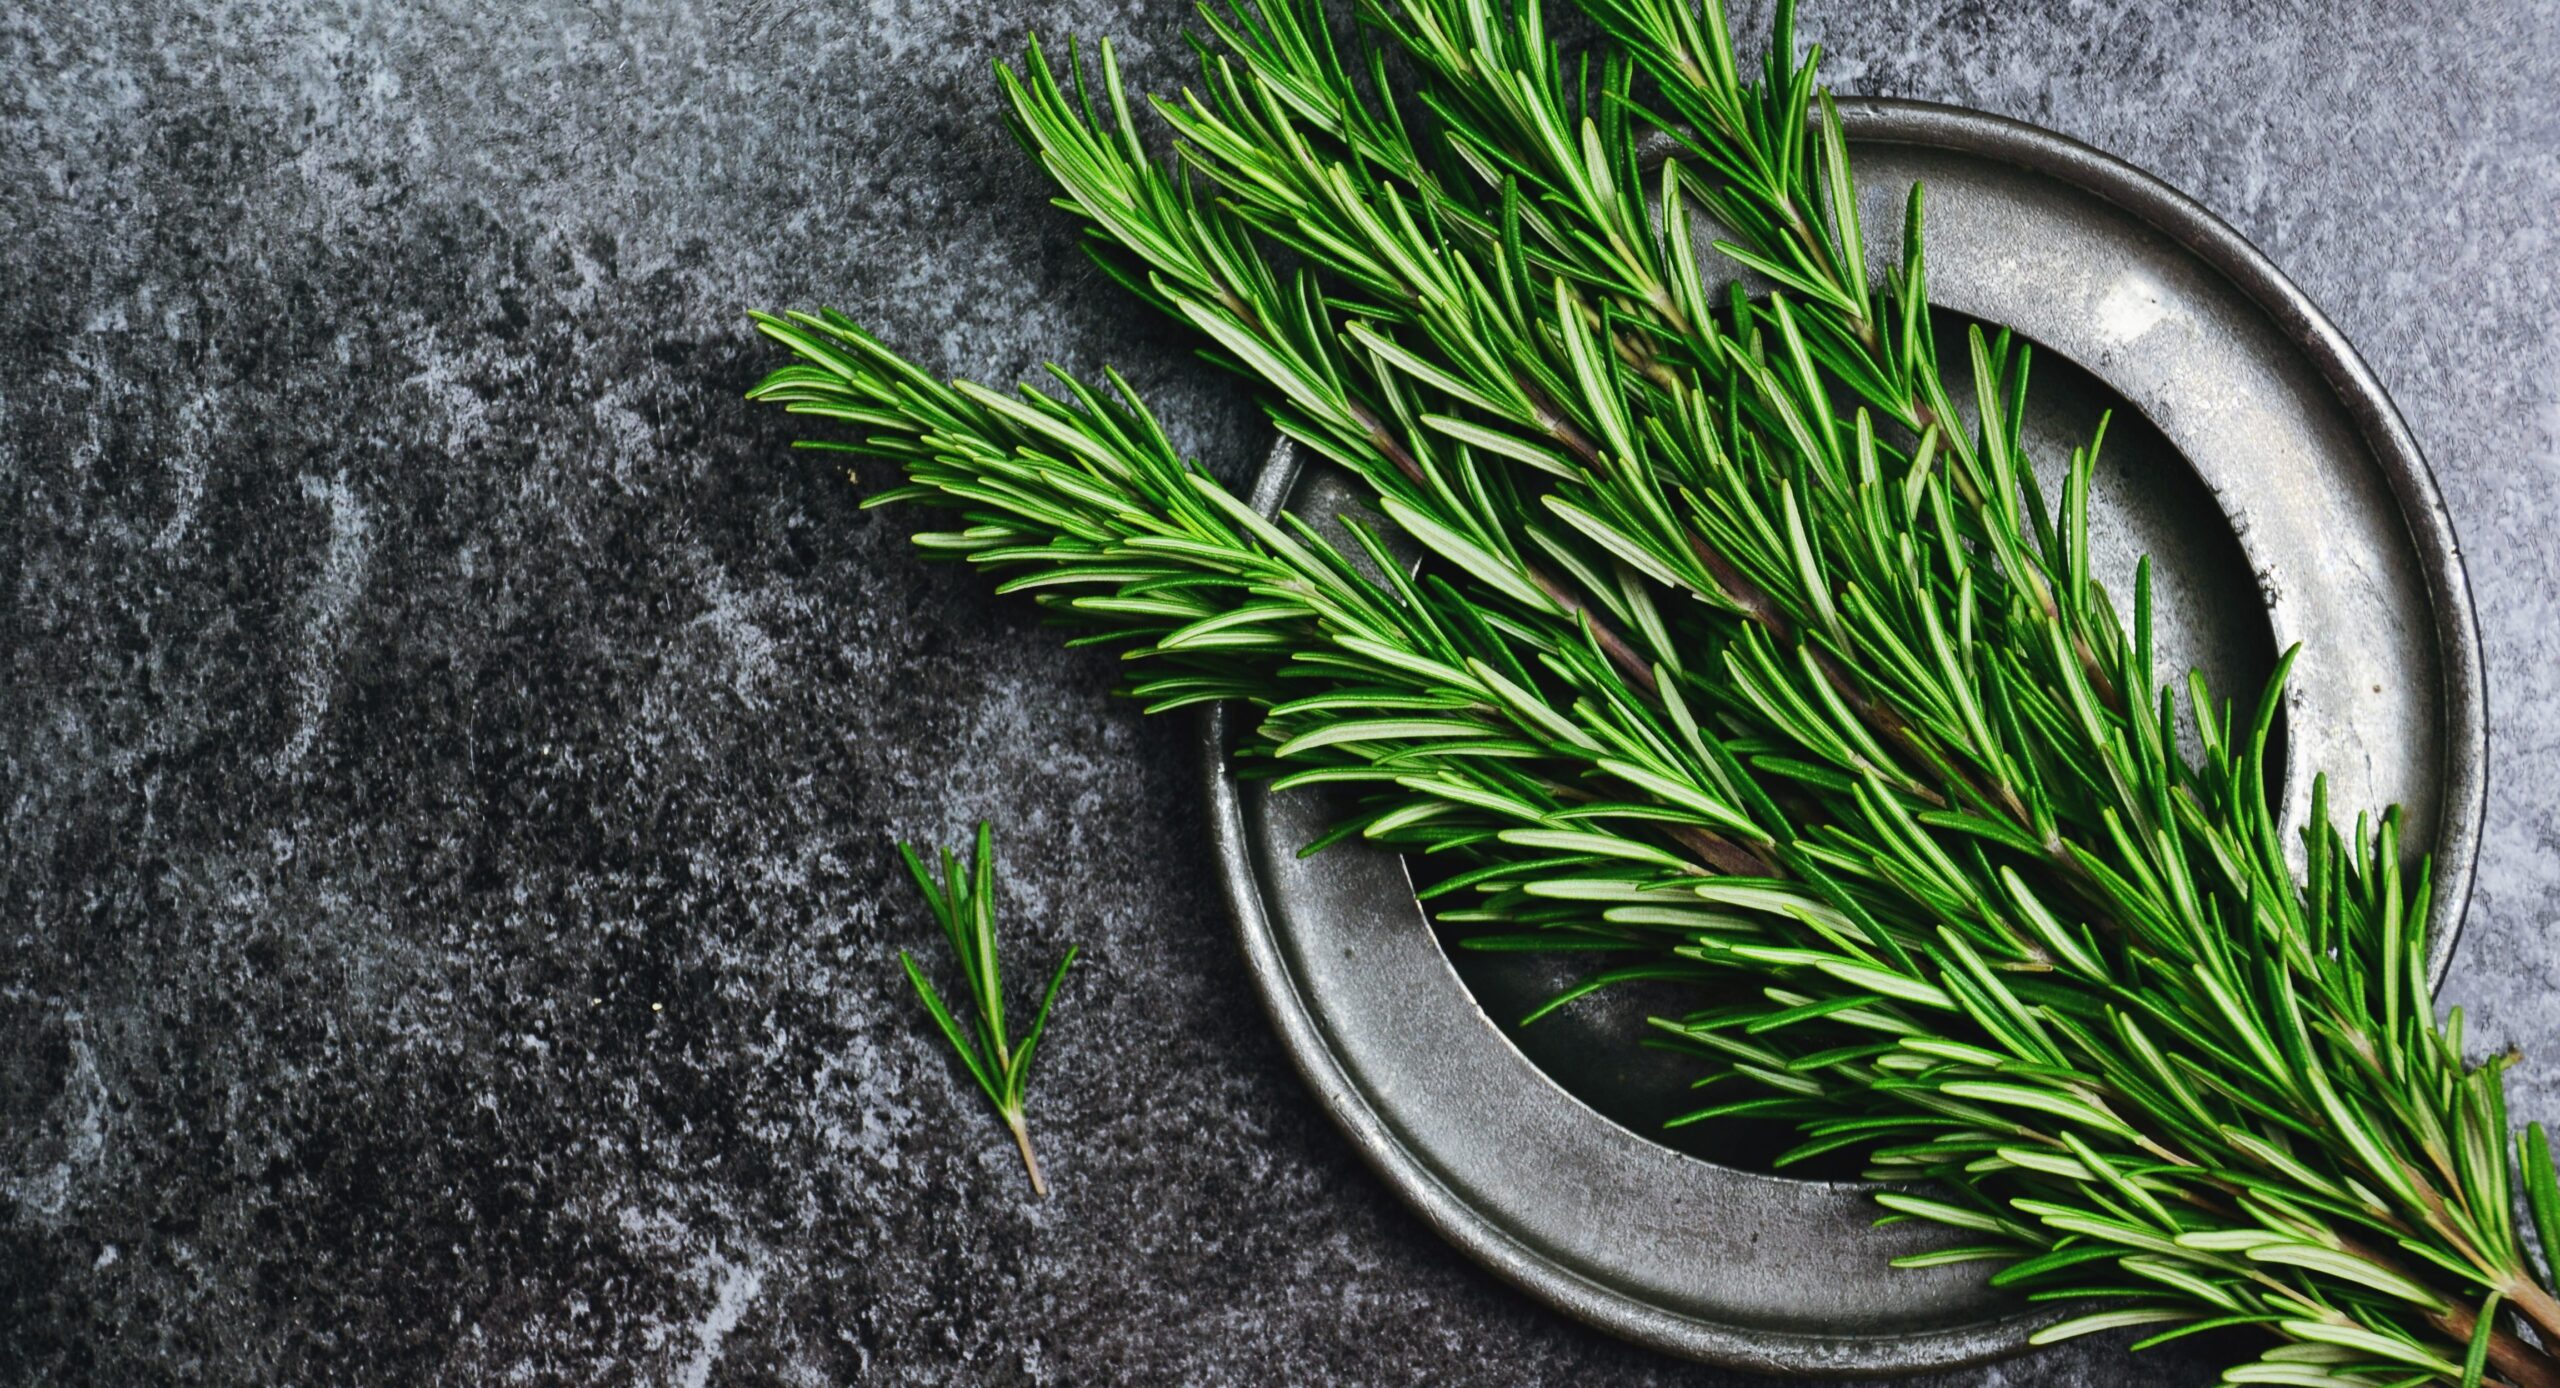 Rosemary: Health benefits, Precautions, and Drug Interactions